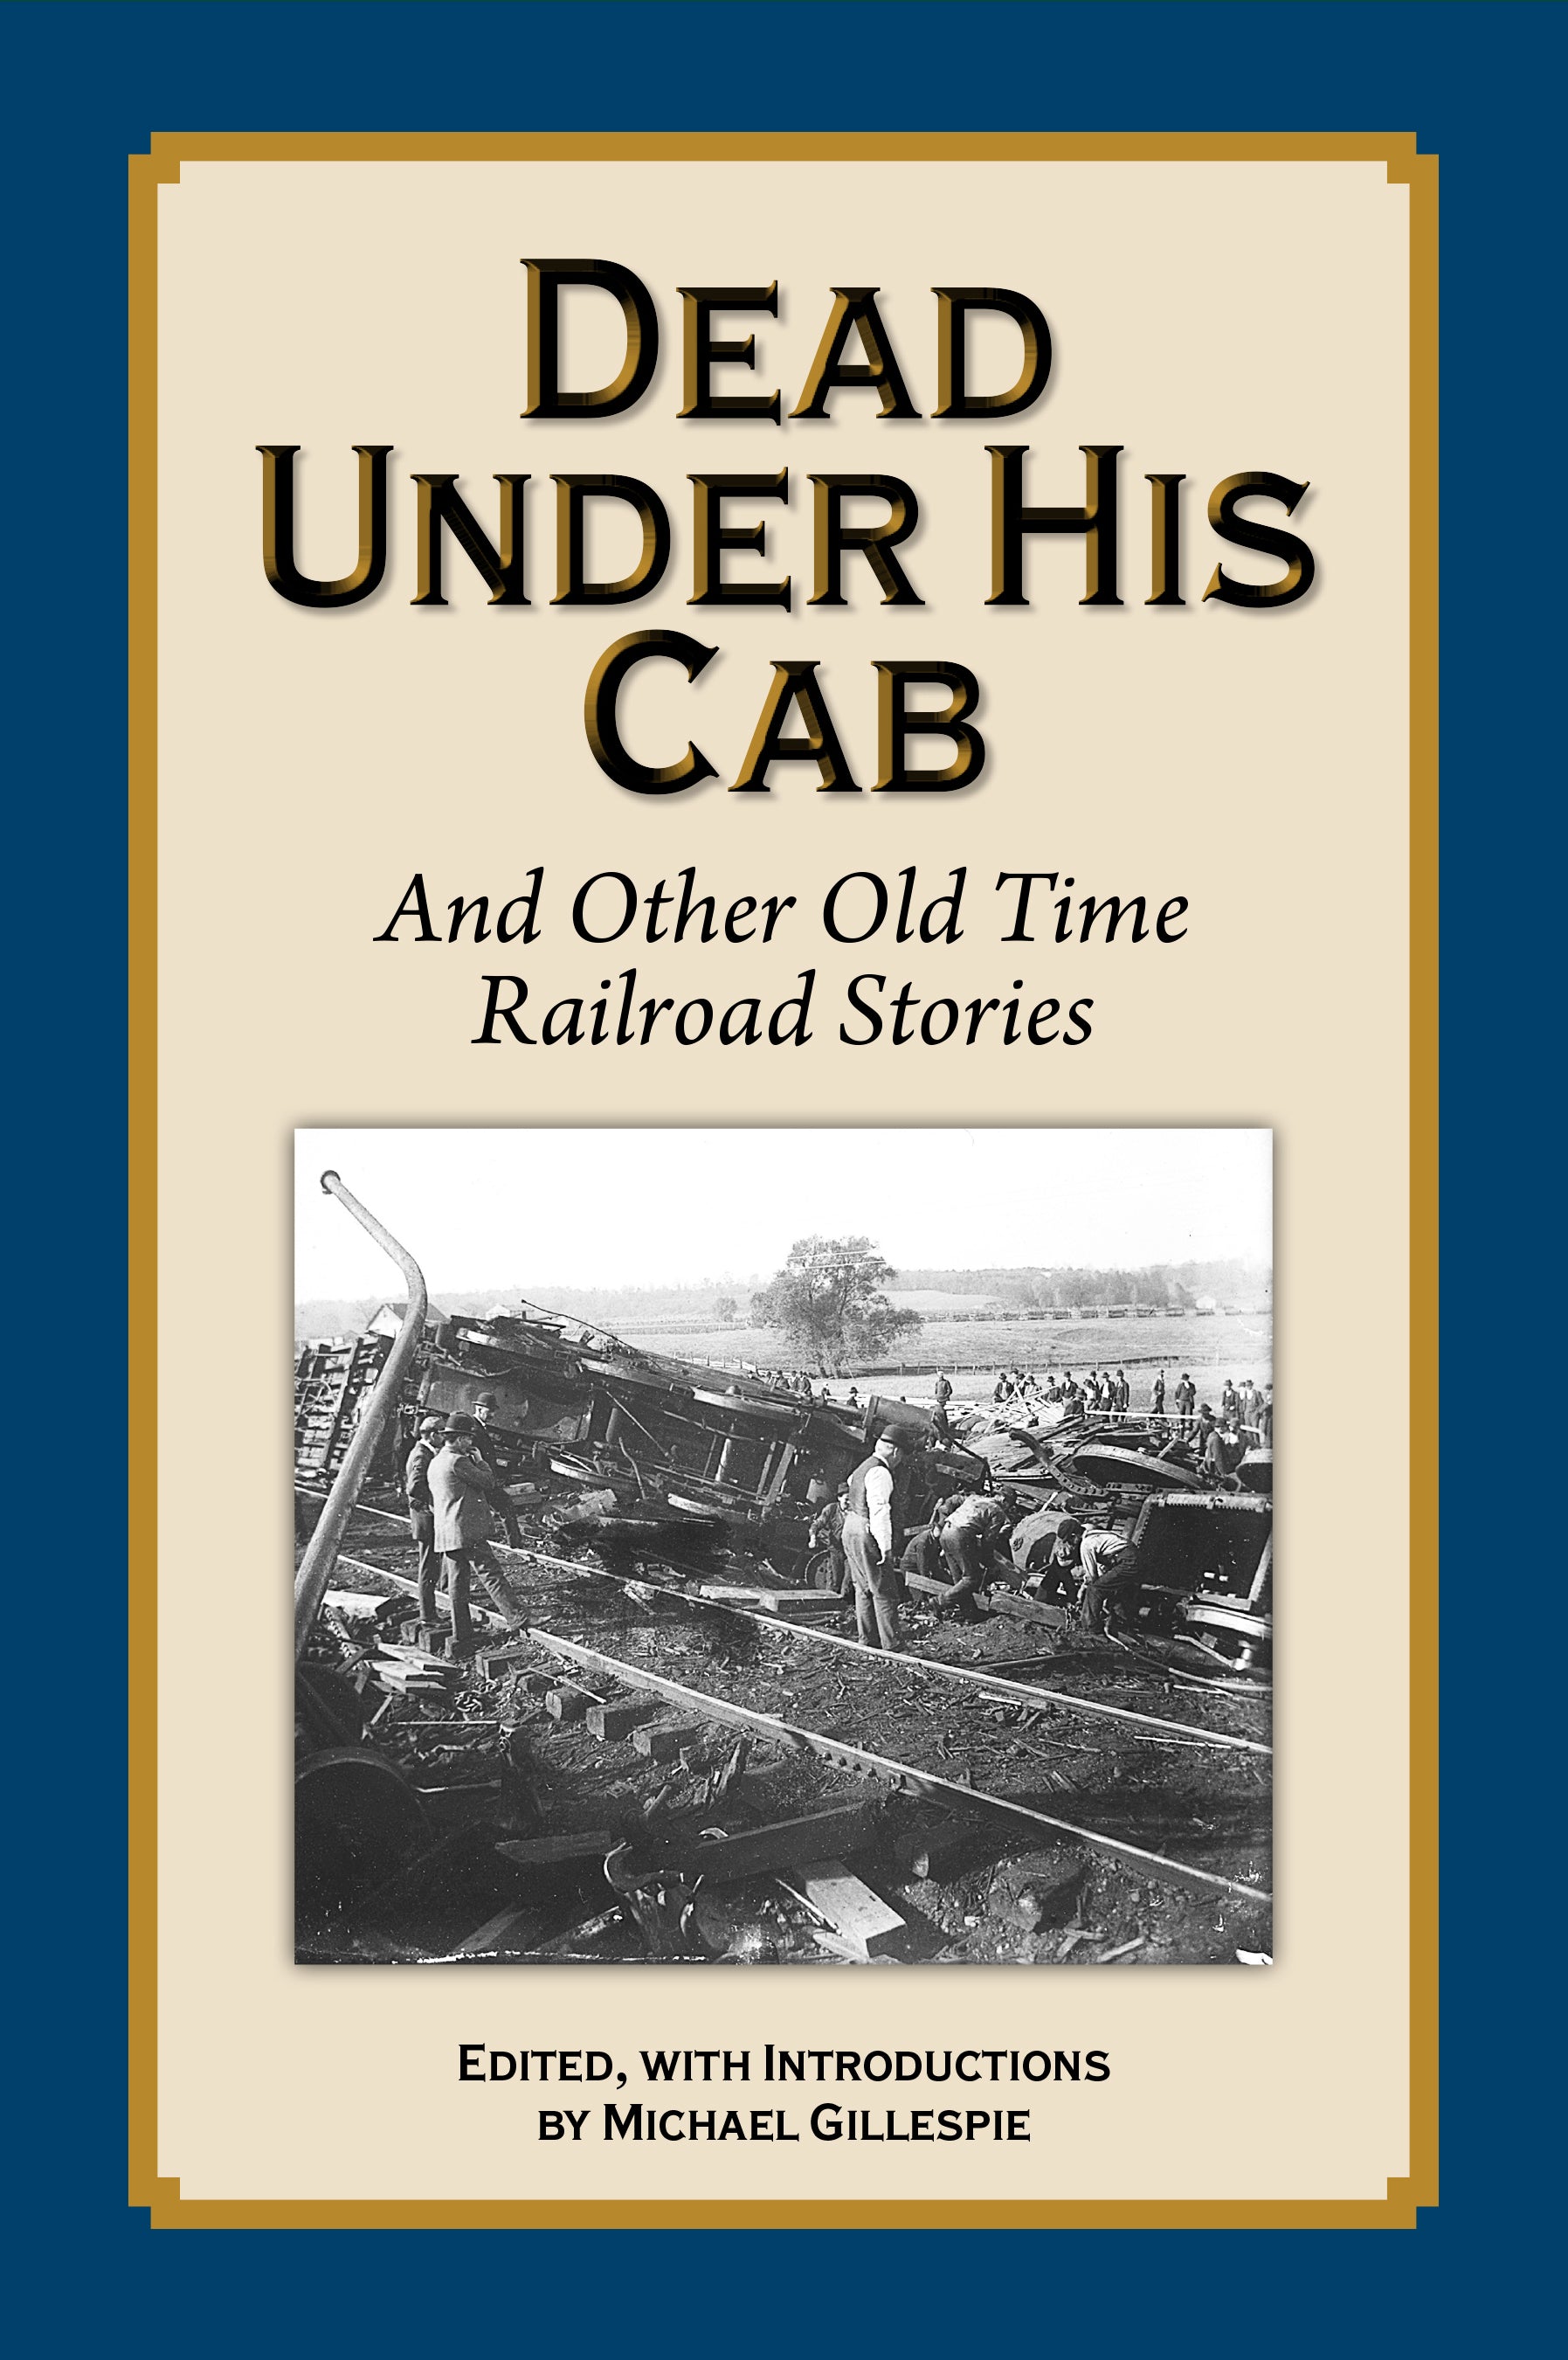 Dead Under His Cab...More Old Time Railroad Stories by Michael Gilespie